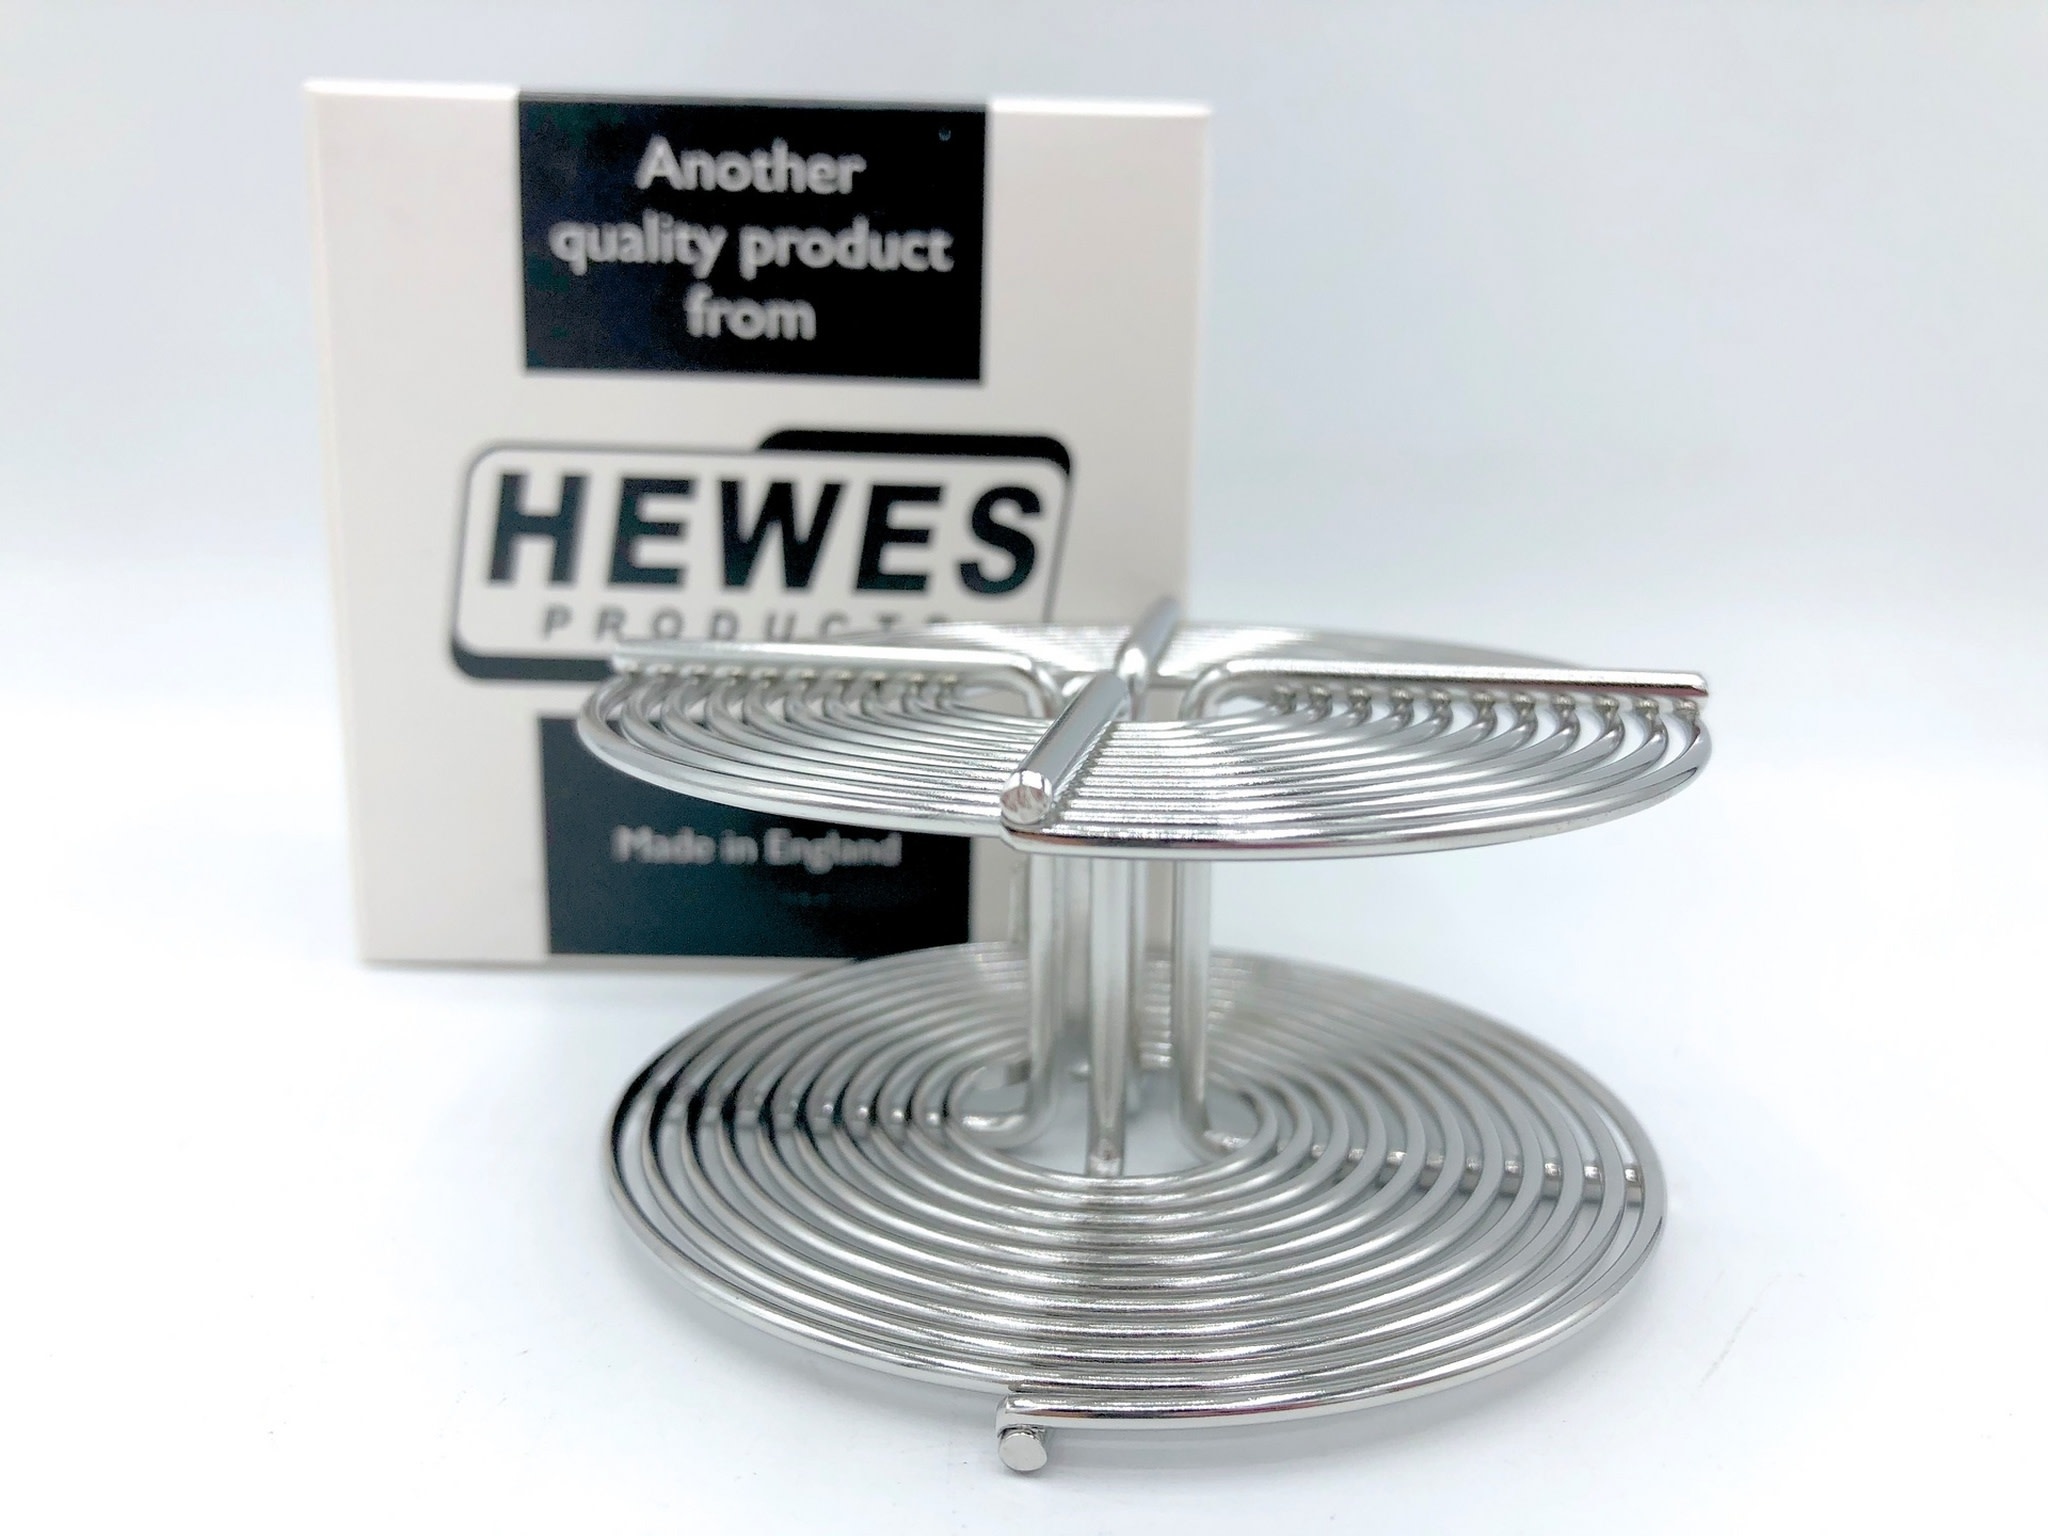 Hewes Heavy Duty Stainless Steel 35mm Film Developing SS Reel (2) - New